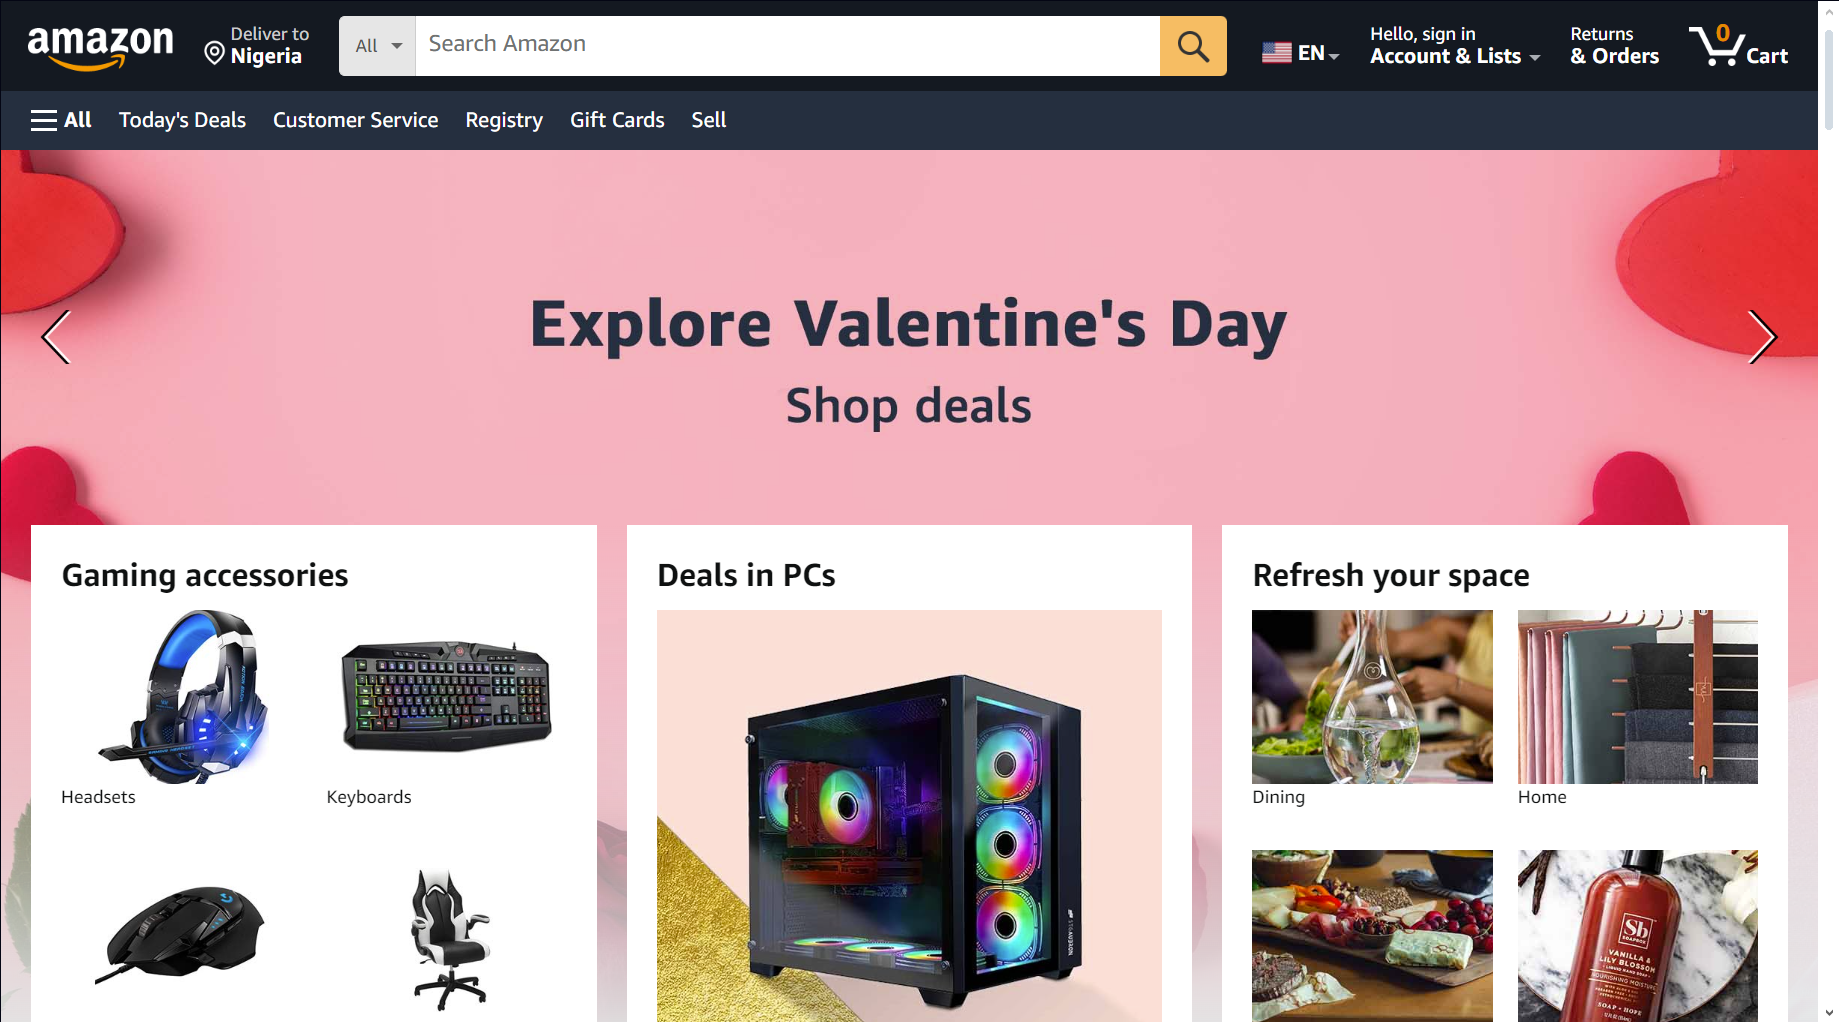 Visit Amazon for Awesome Valentine’s Day Deals